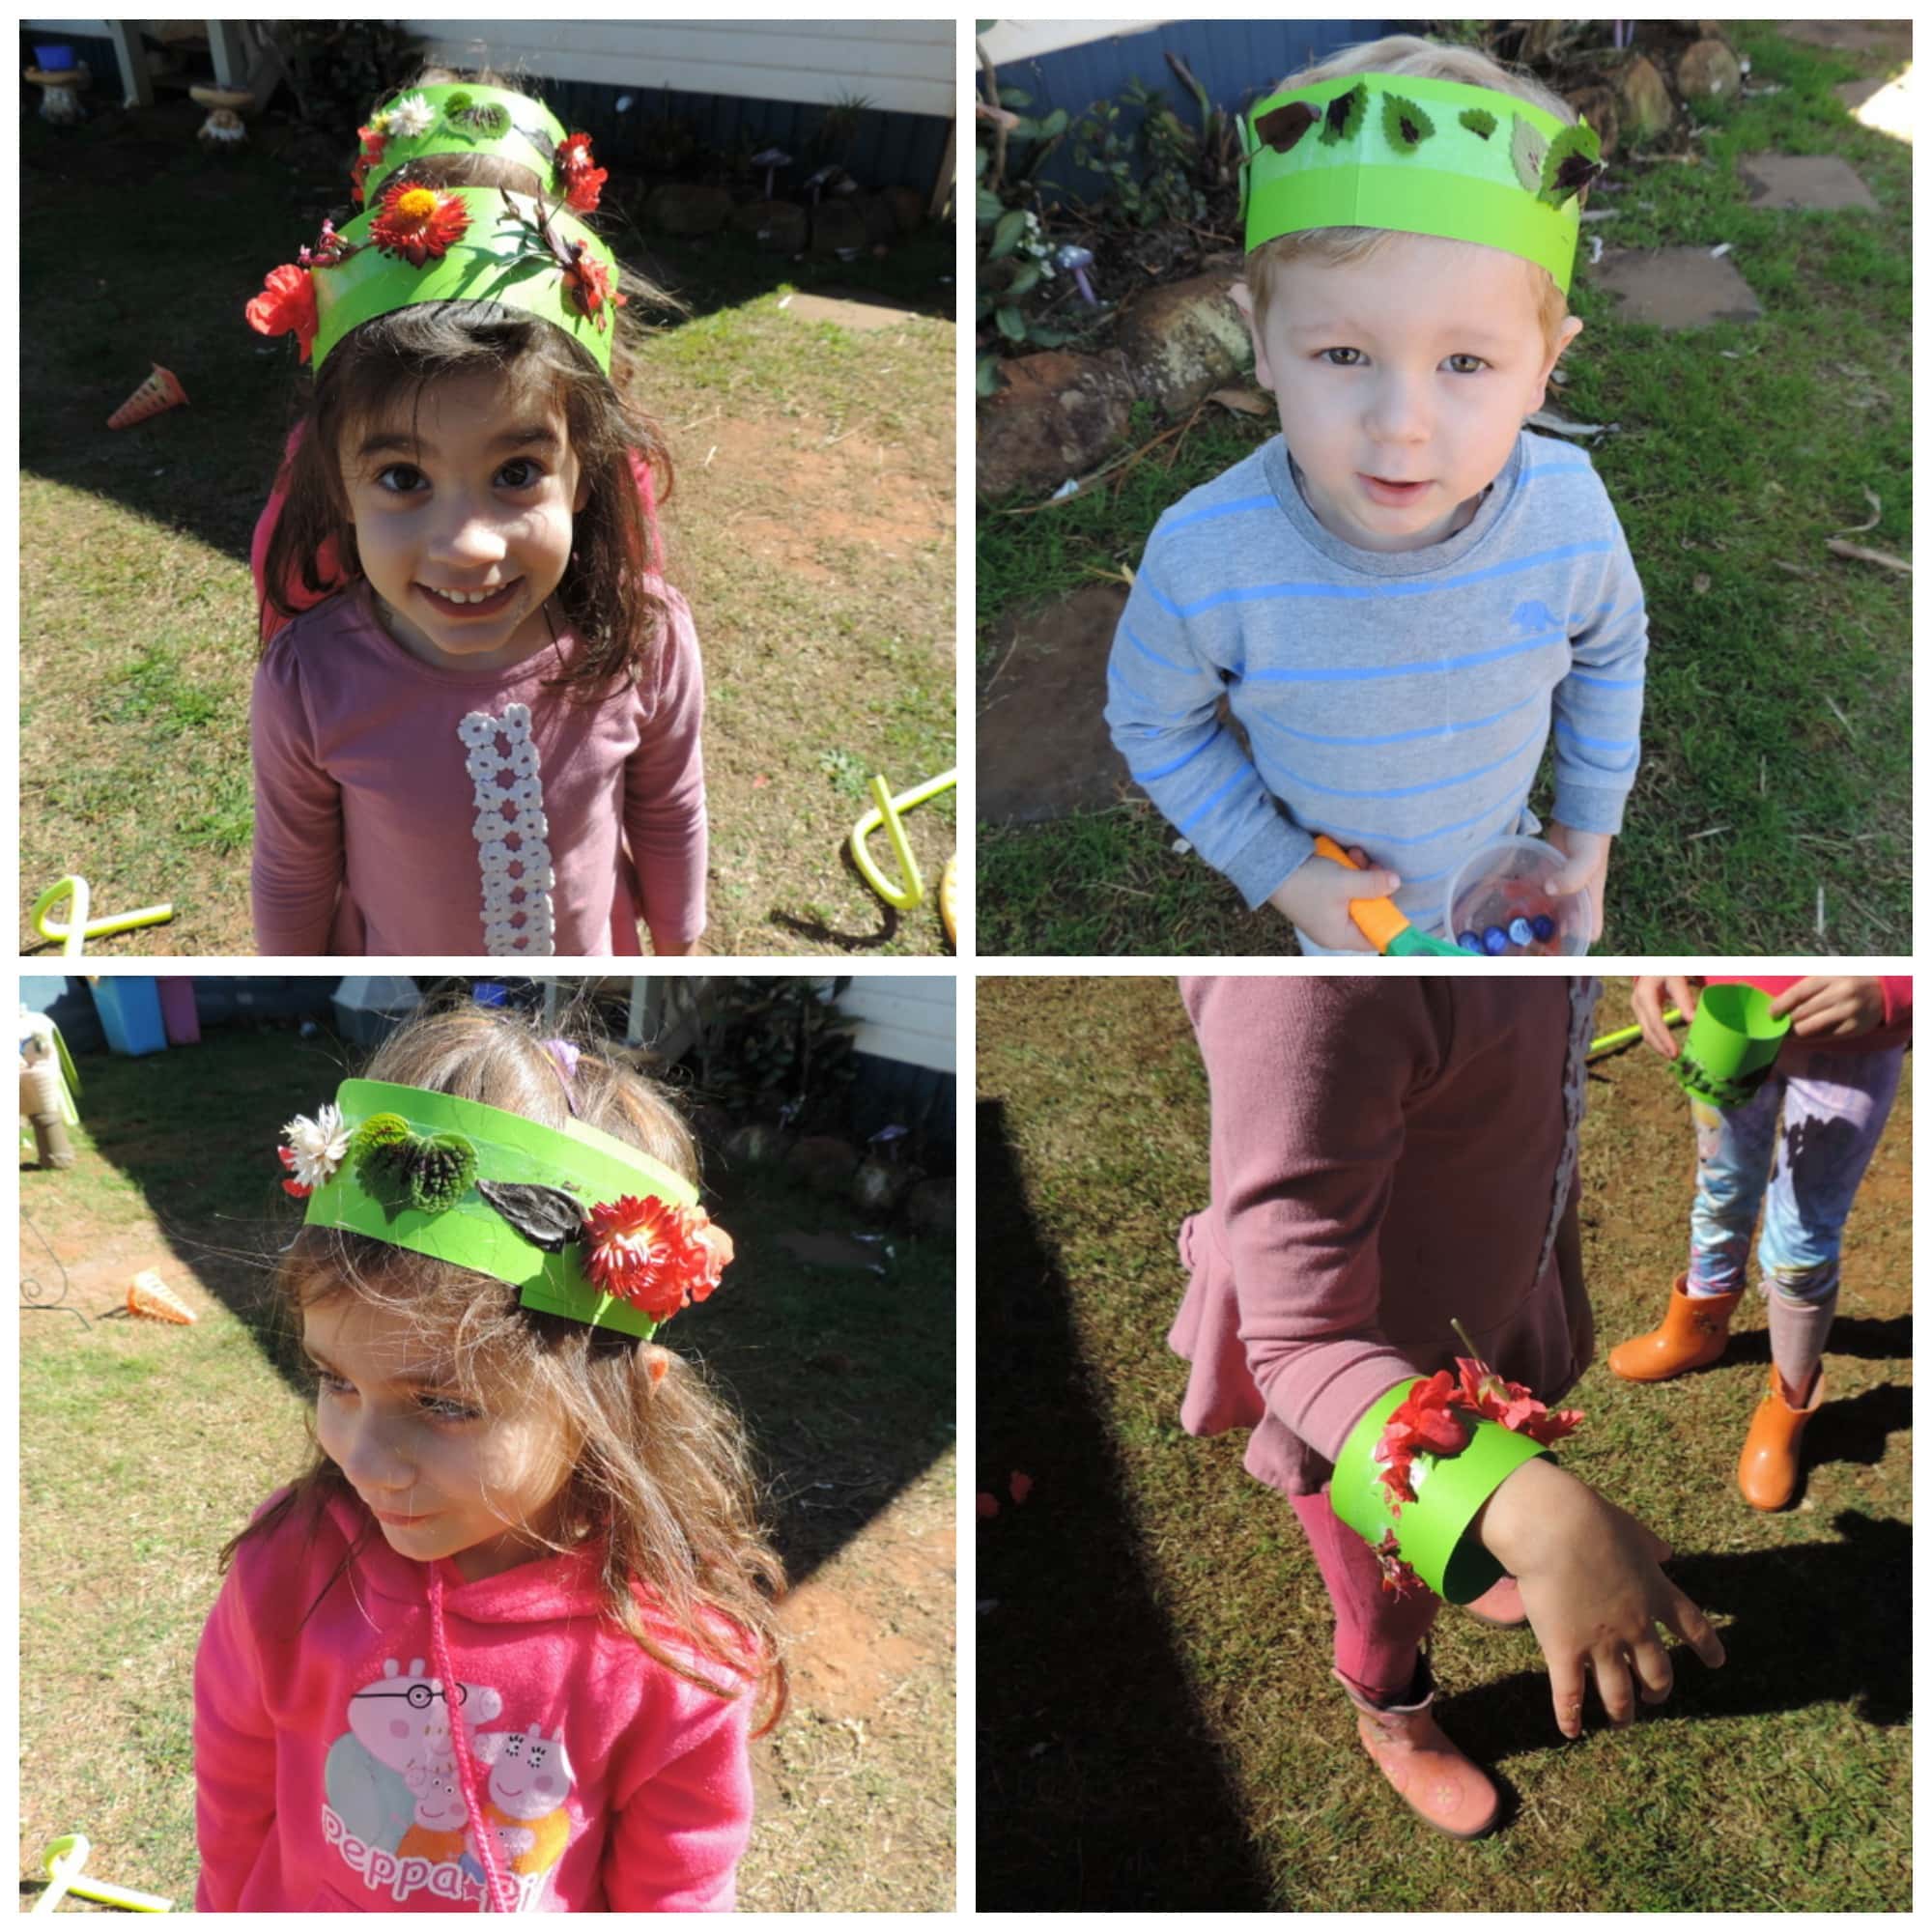 Crowns from Nature - an easy sensory activity that is also mess free! A wonderful way to incorporate natural materials into play and learning! See more at Mummy Musings and Mayhem.